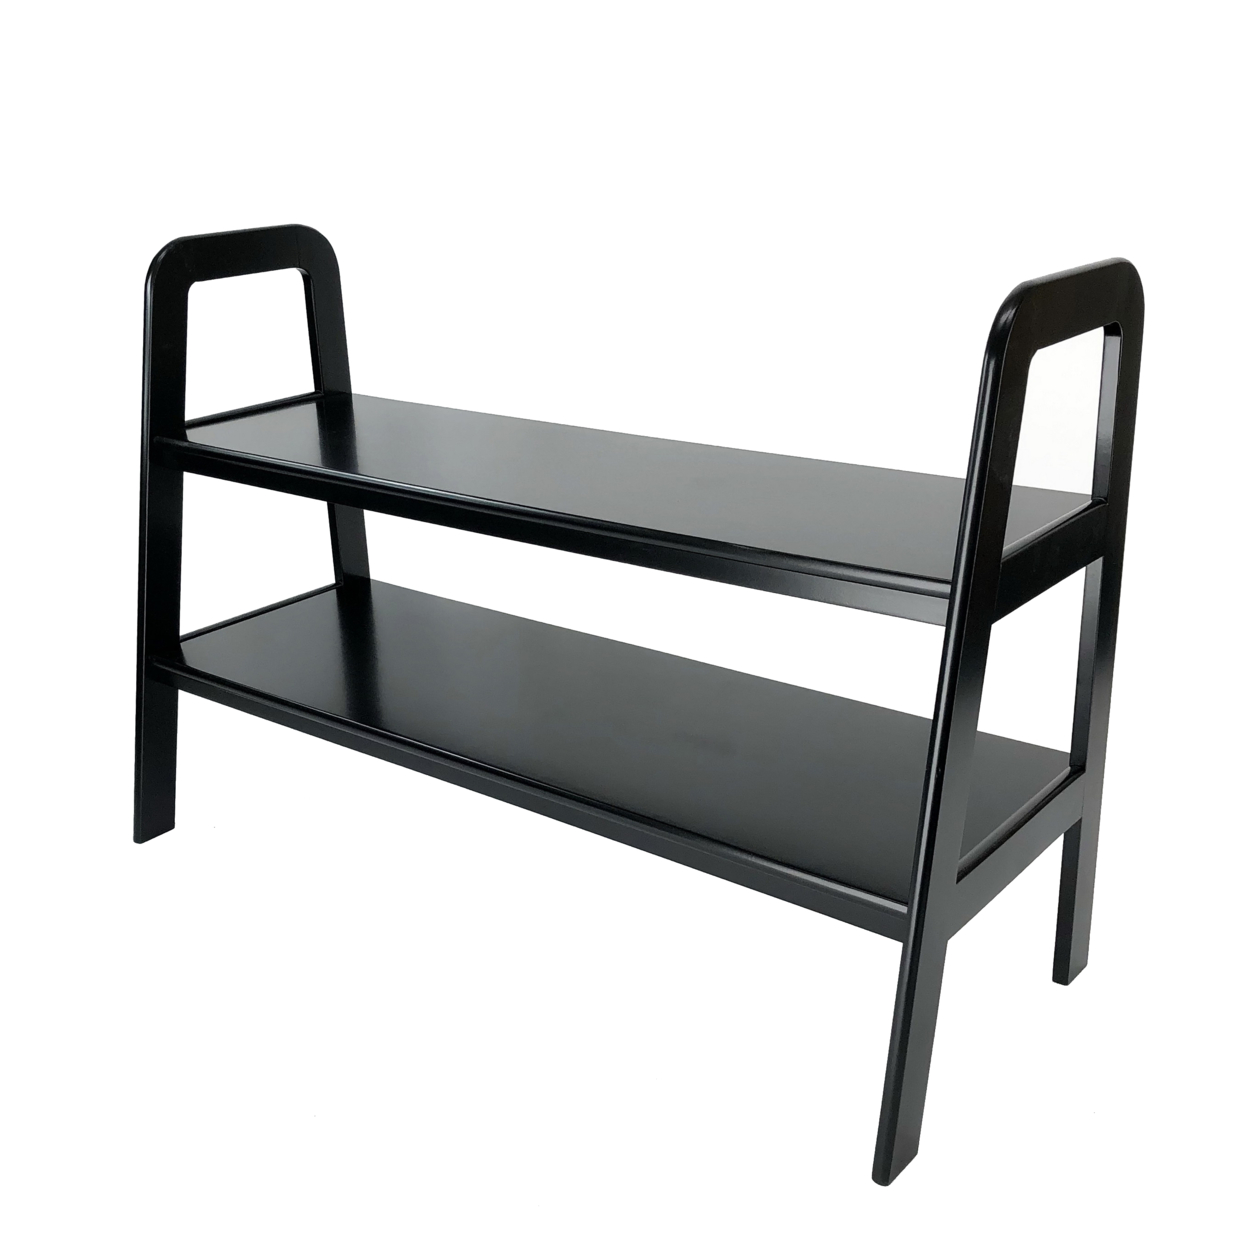 Contemporary Ladder Style TV Stand With 2 Open Cut Shelves, Black- Saltoro Sherpi